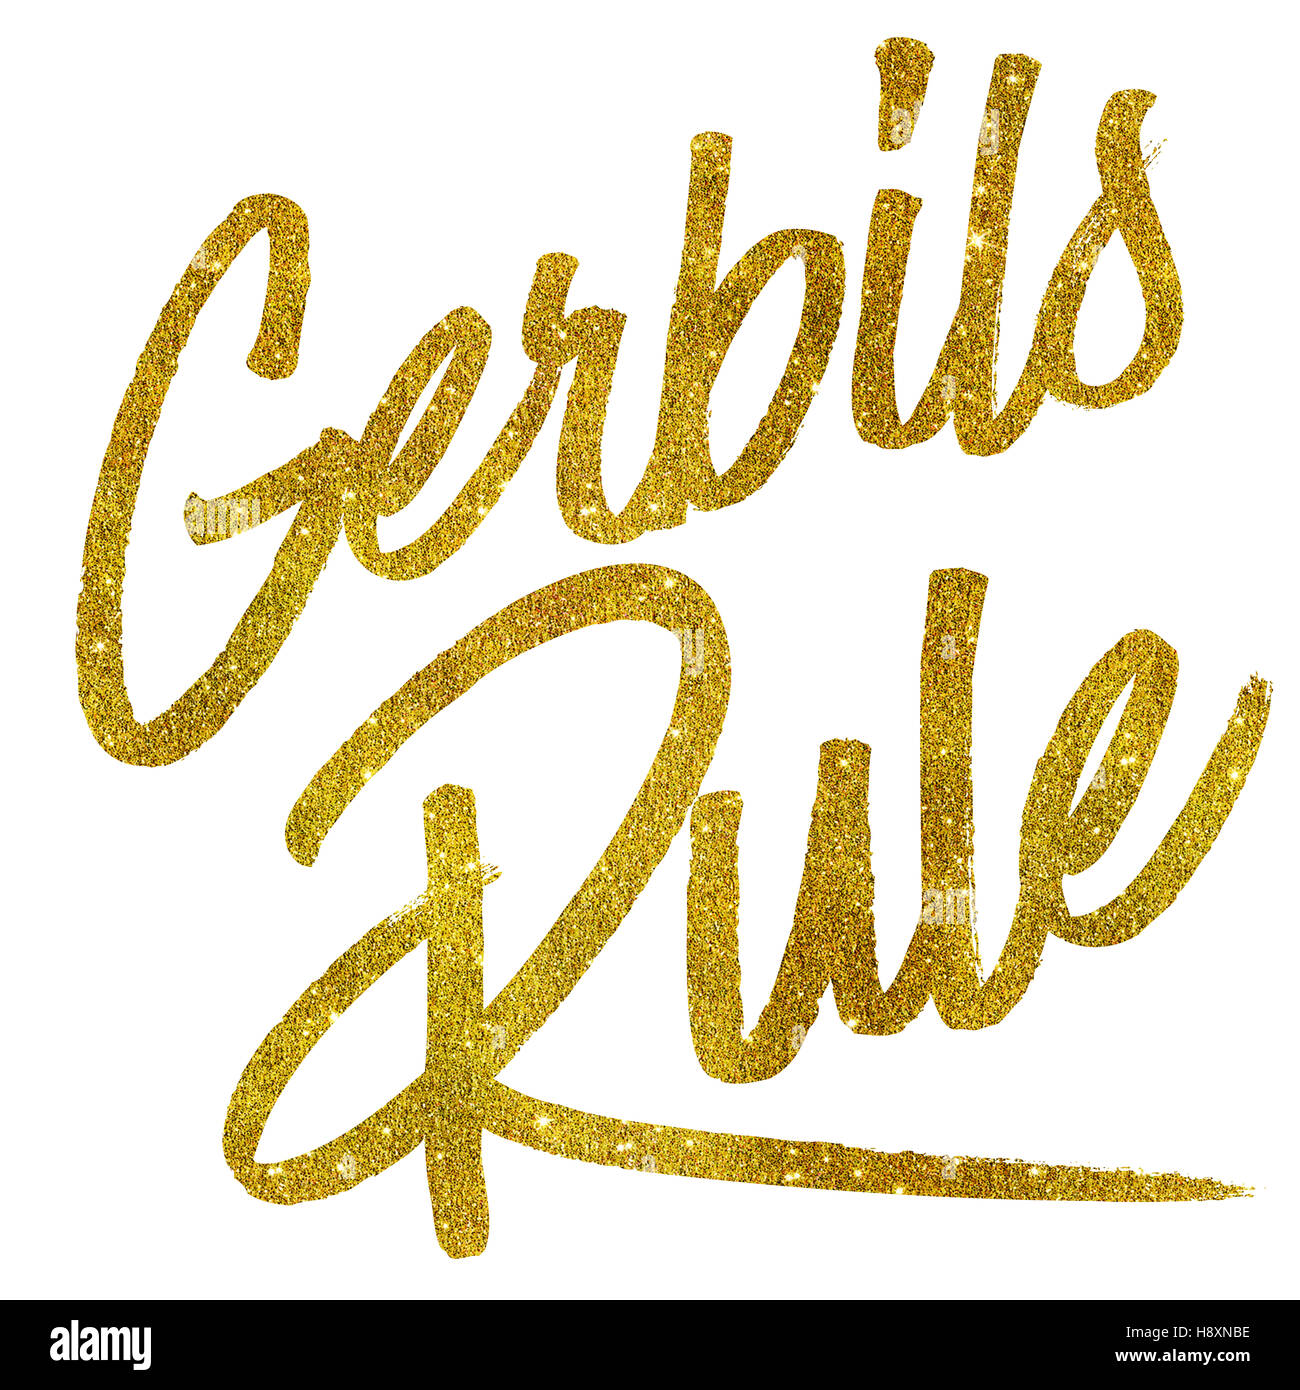 Gerbils Rule Gold Faux Foil Metallic Glitter Quote Isolated Stock Photo